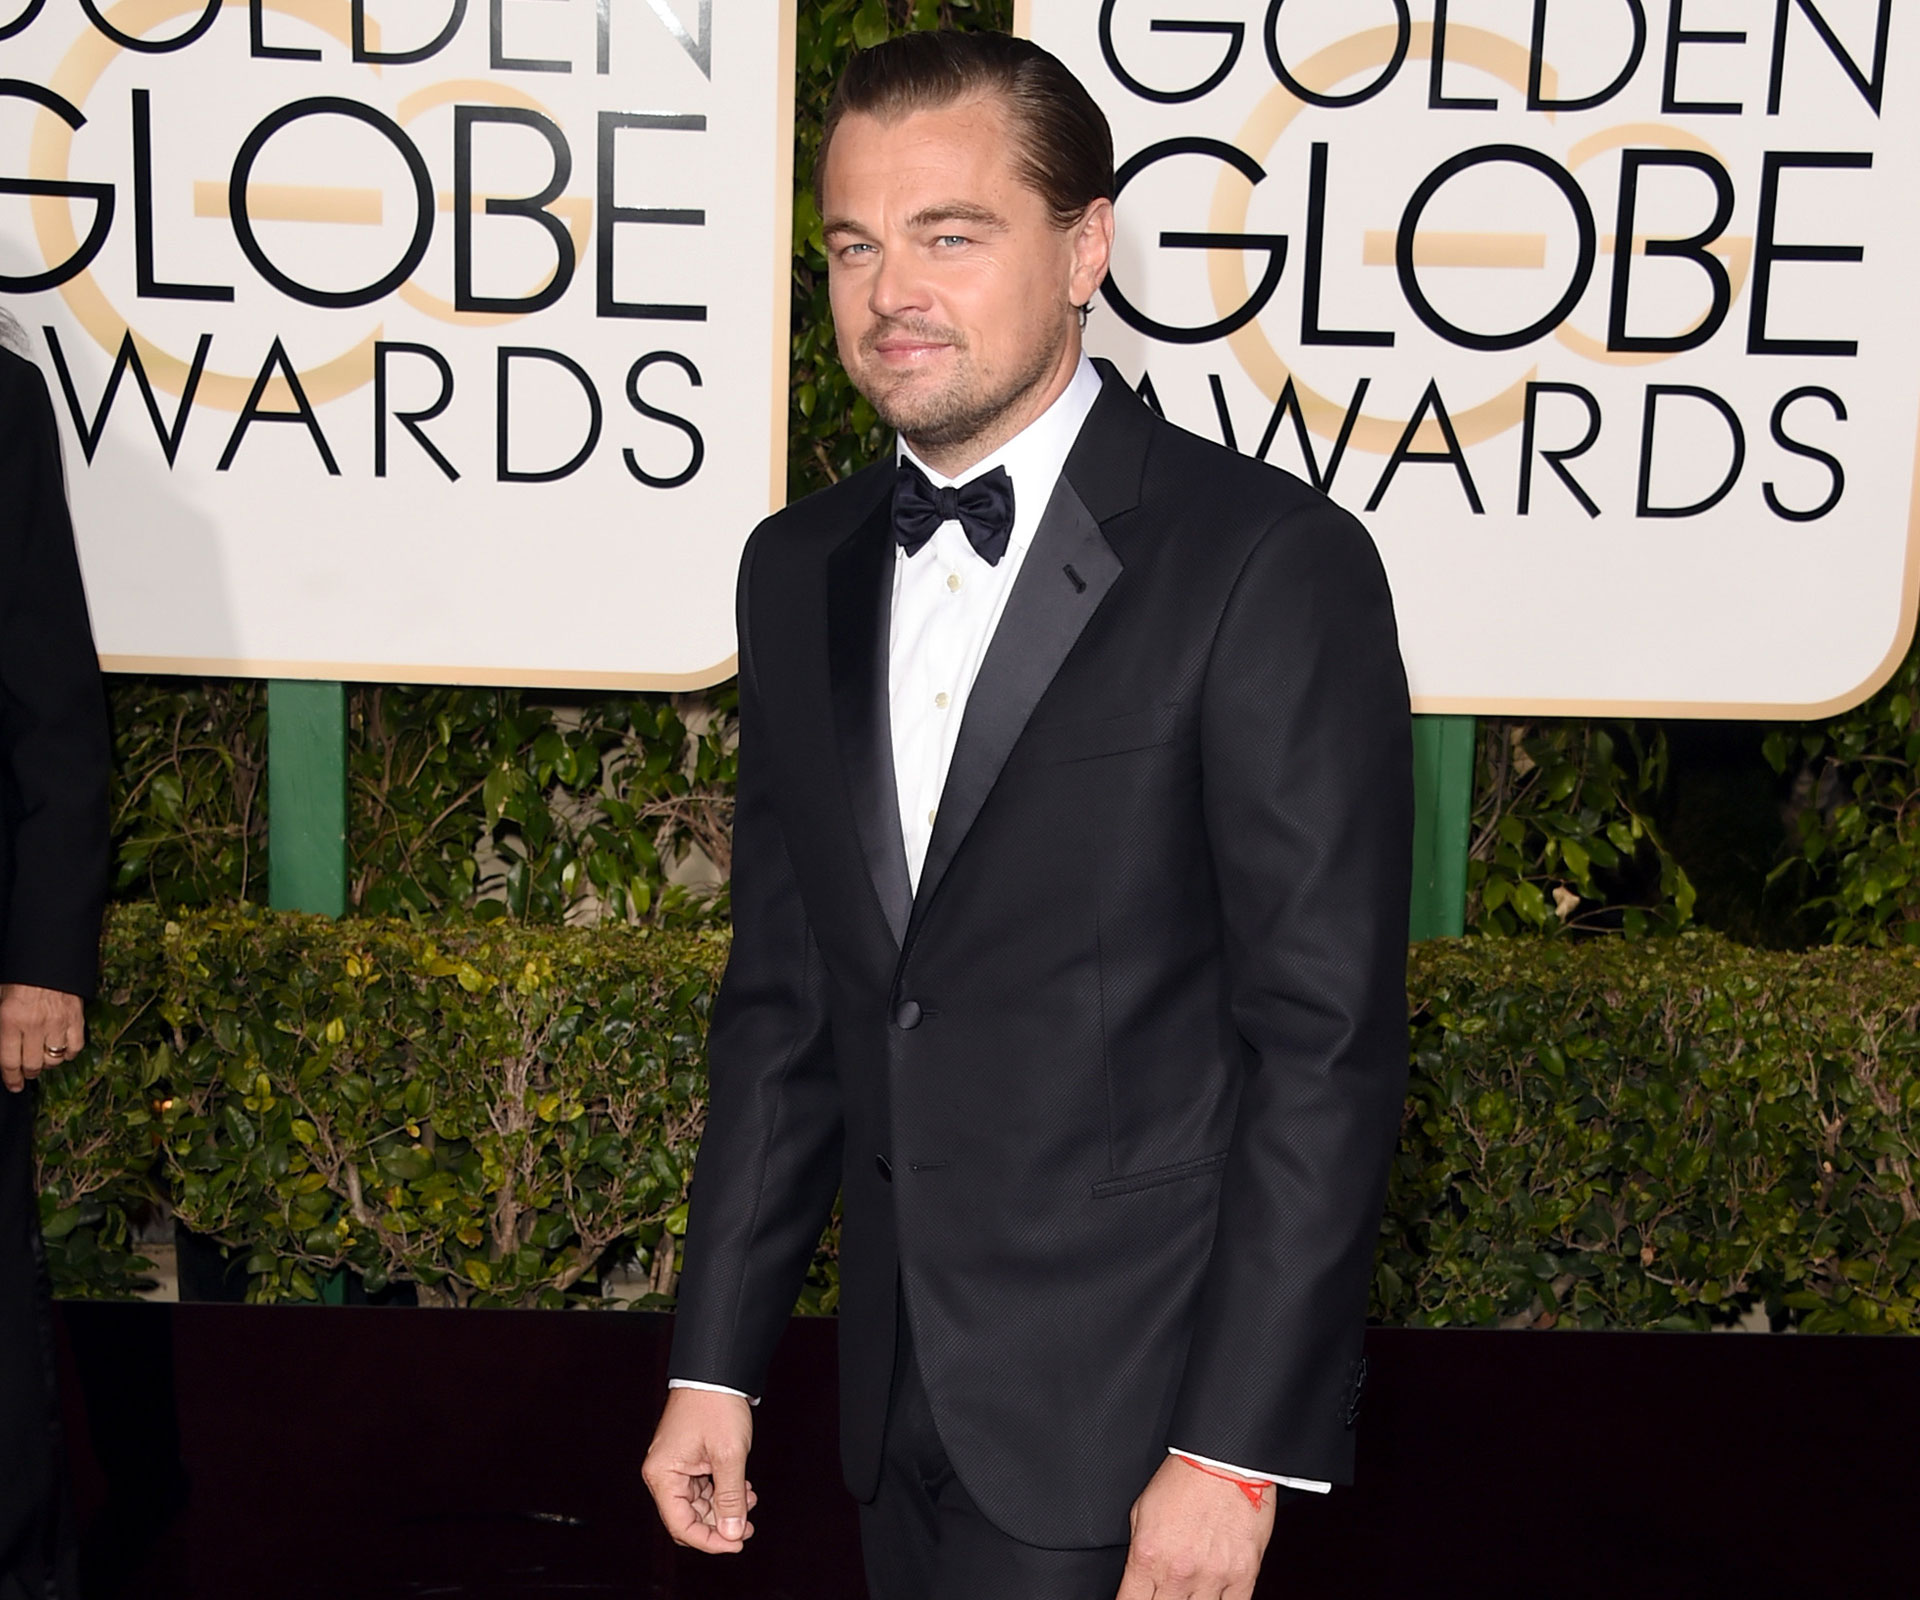 Watch: Leonardo DiCaprio can’t stop smiling after Oscar win